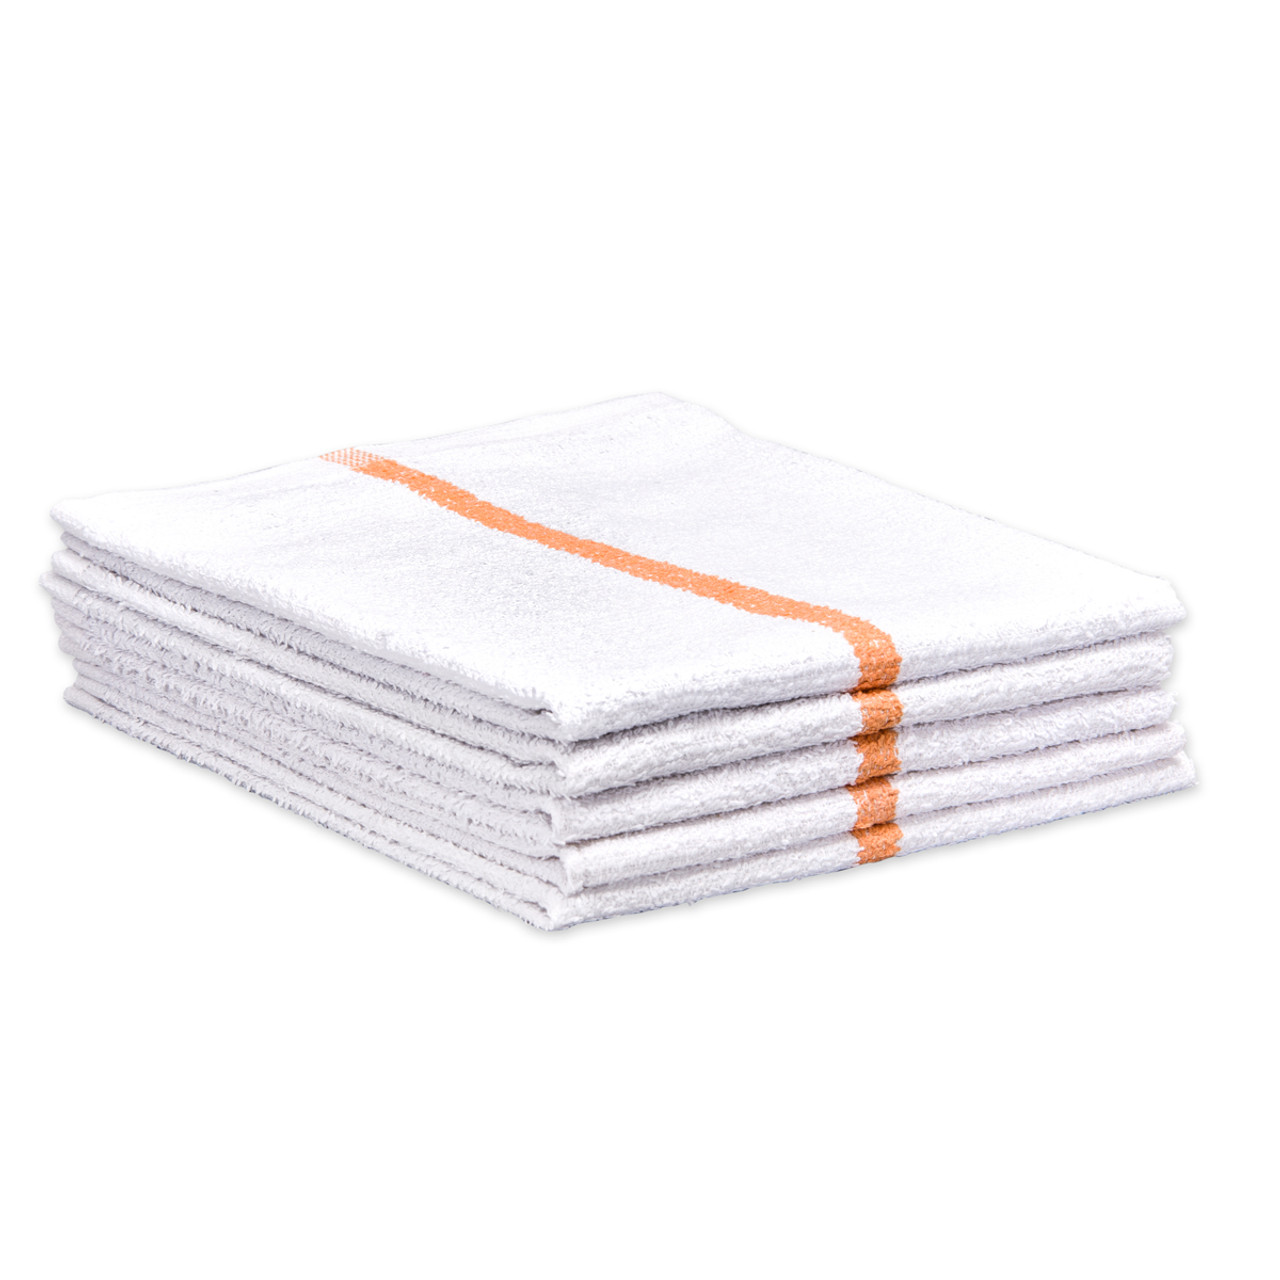 https://cdn11.bigcommerce.com/s-a5uwe4c7wz/images/stencil/1280x1280/products/500/1565/1ST-QUALITY-COTTON-TERRY-BAR-TOWELS-16X19-gold__84086.1585852340.jpg?c=1